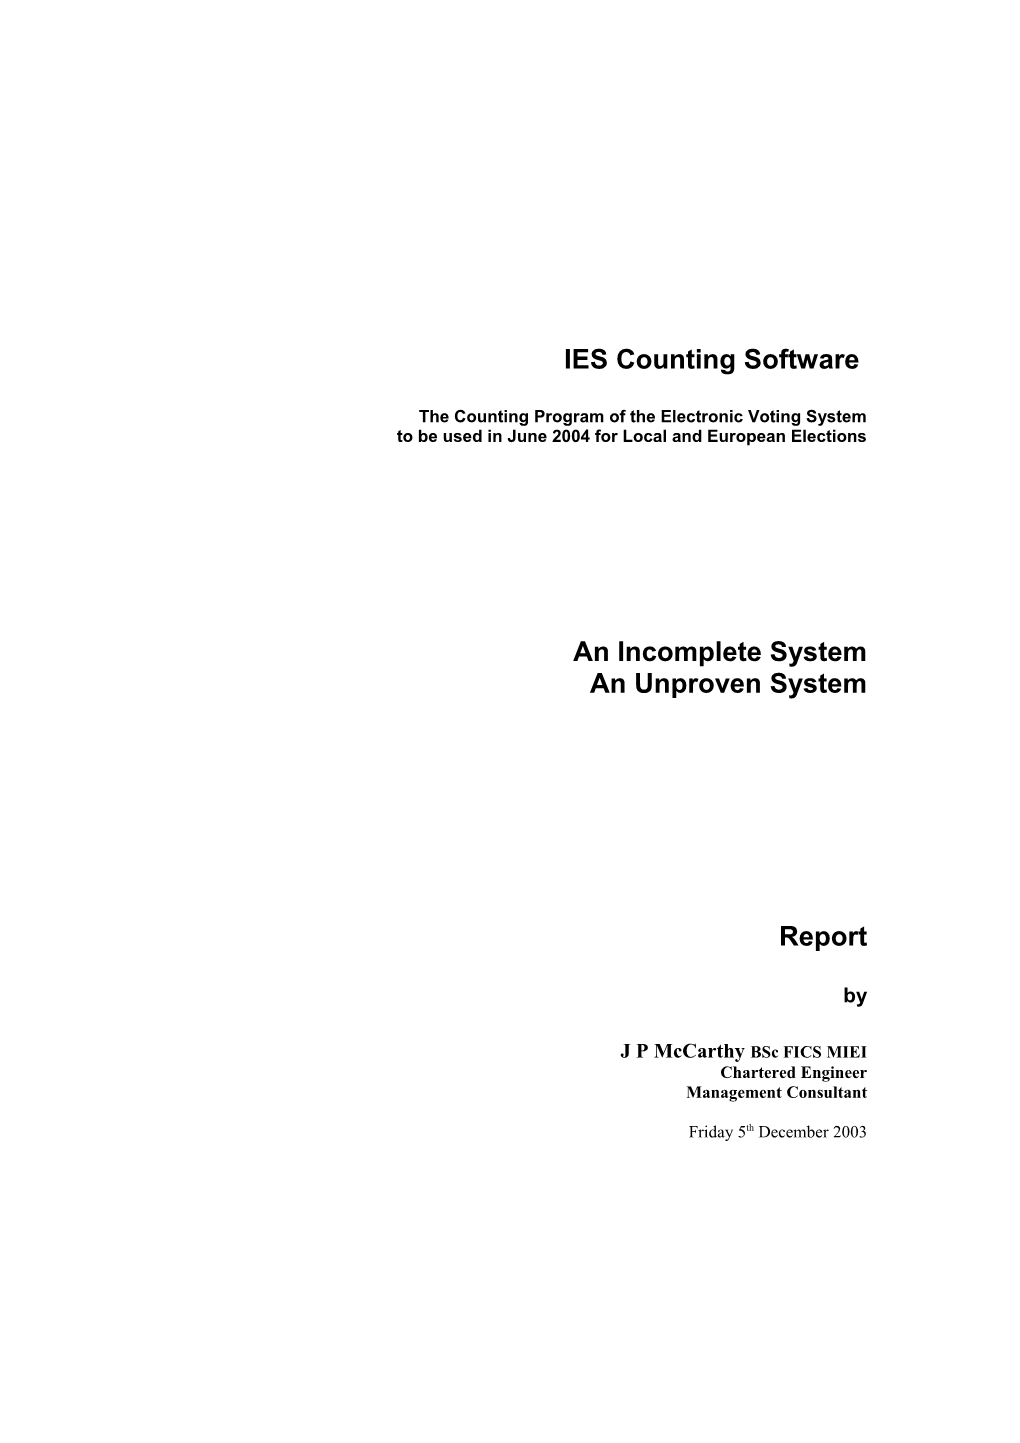 Report on IES Counting Software